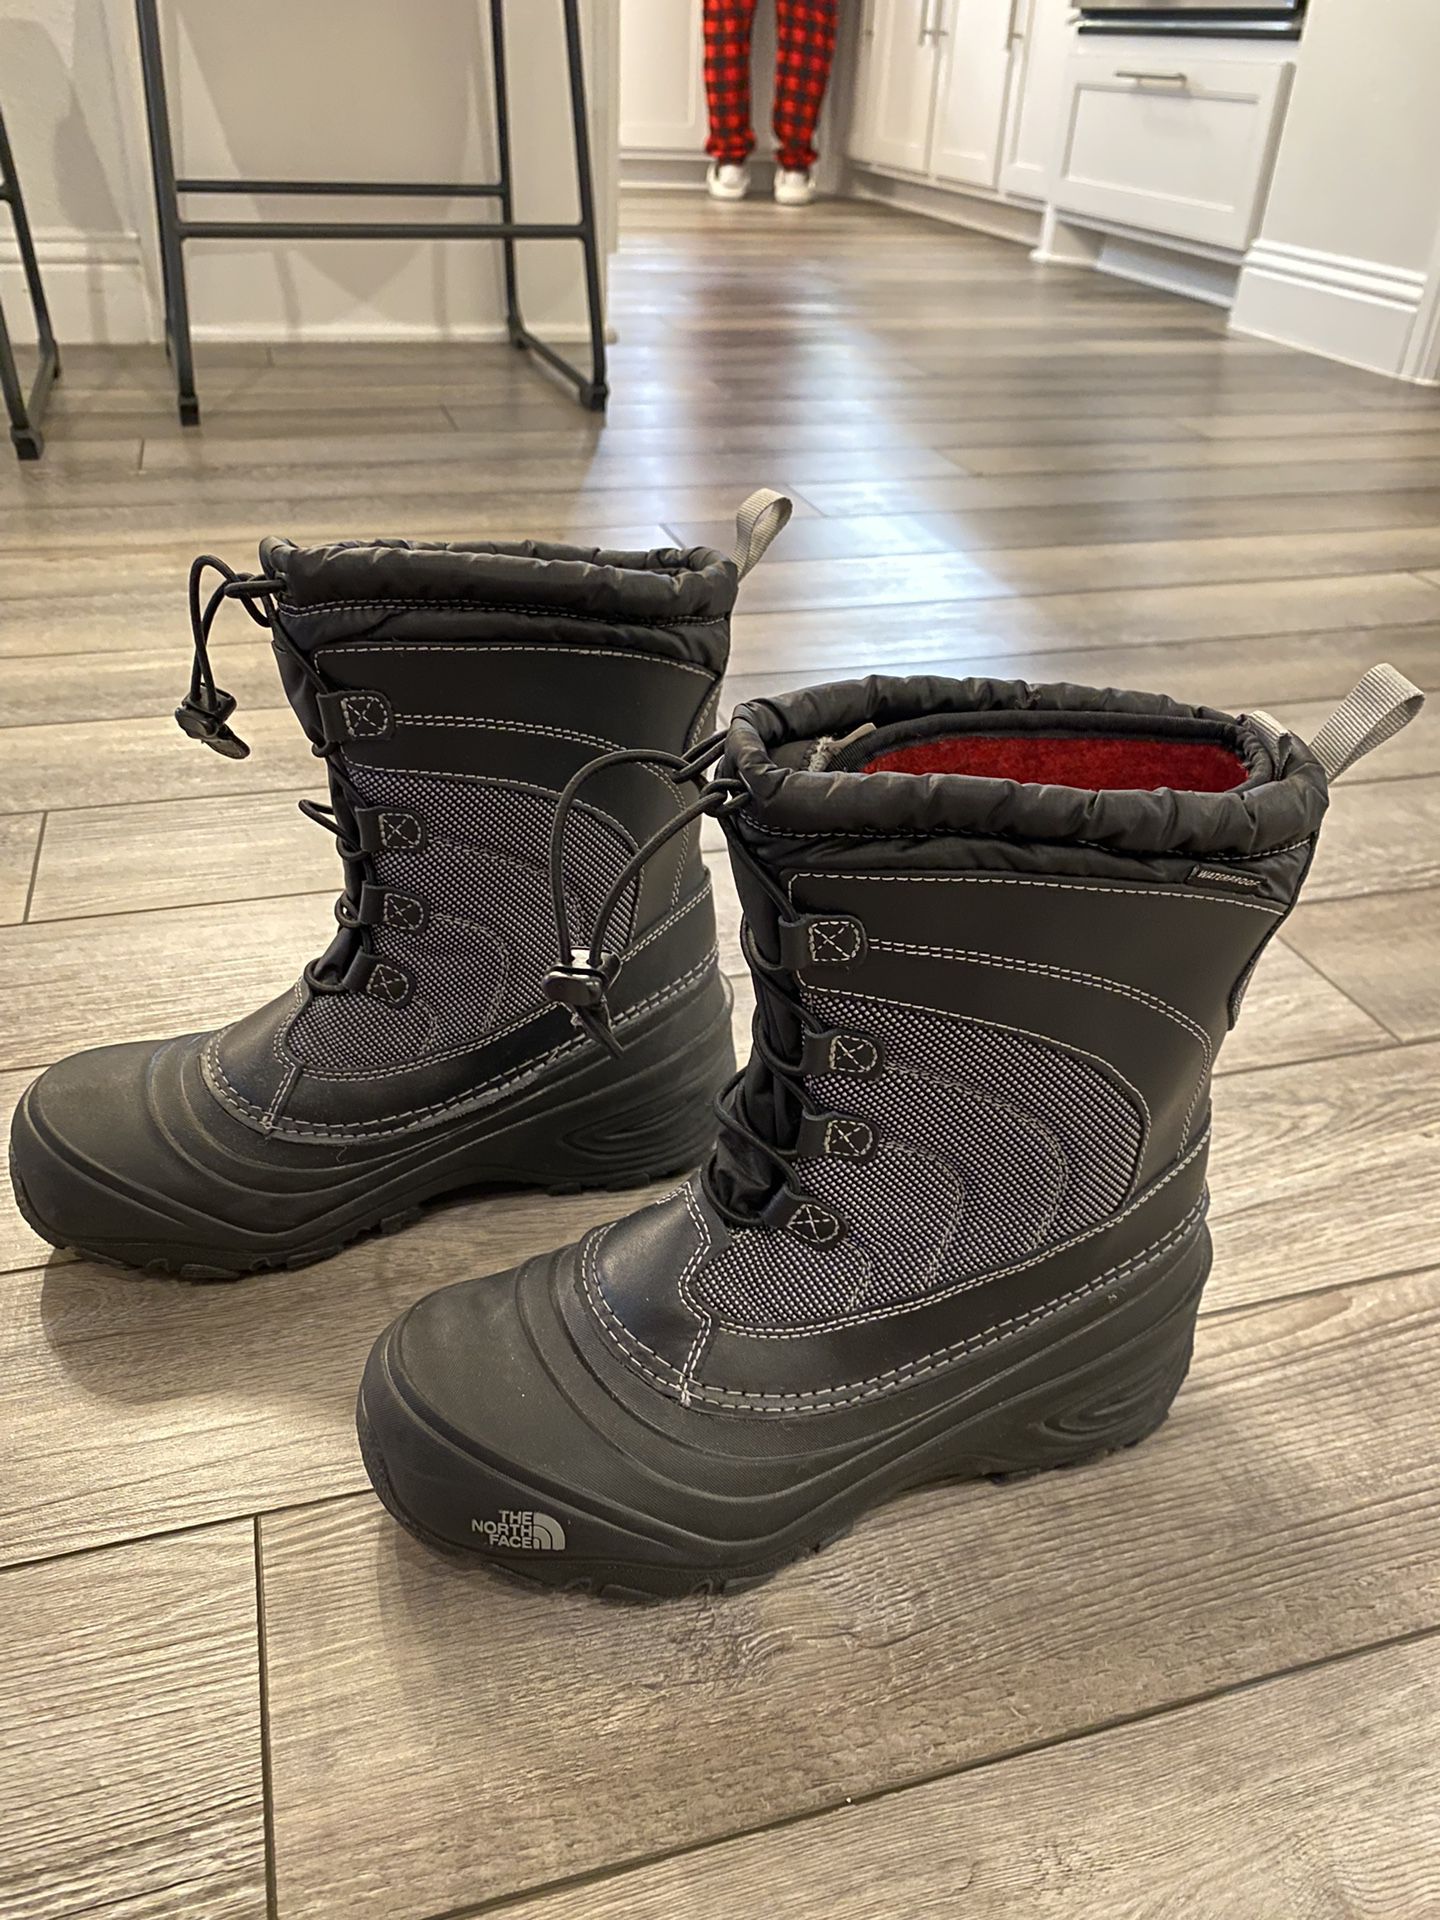 North Face Snow Boots Size 7 US